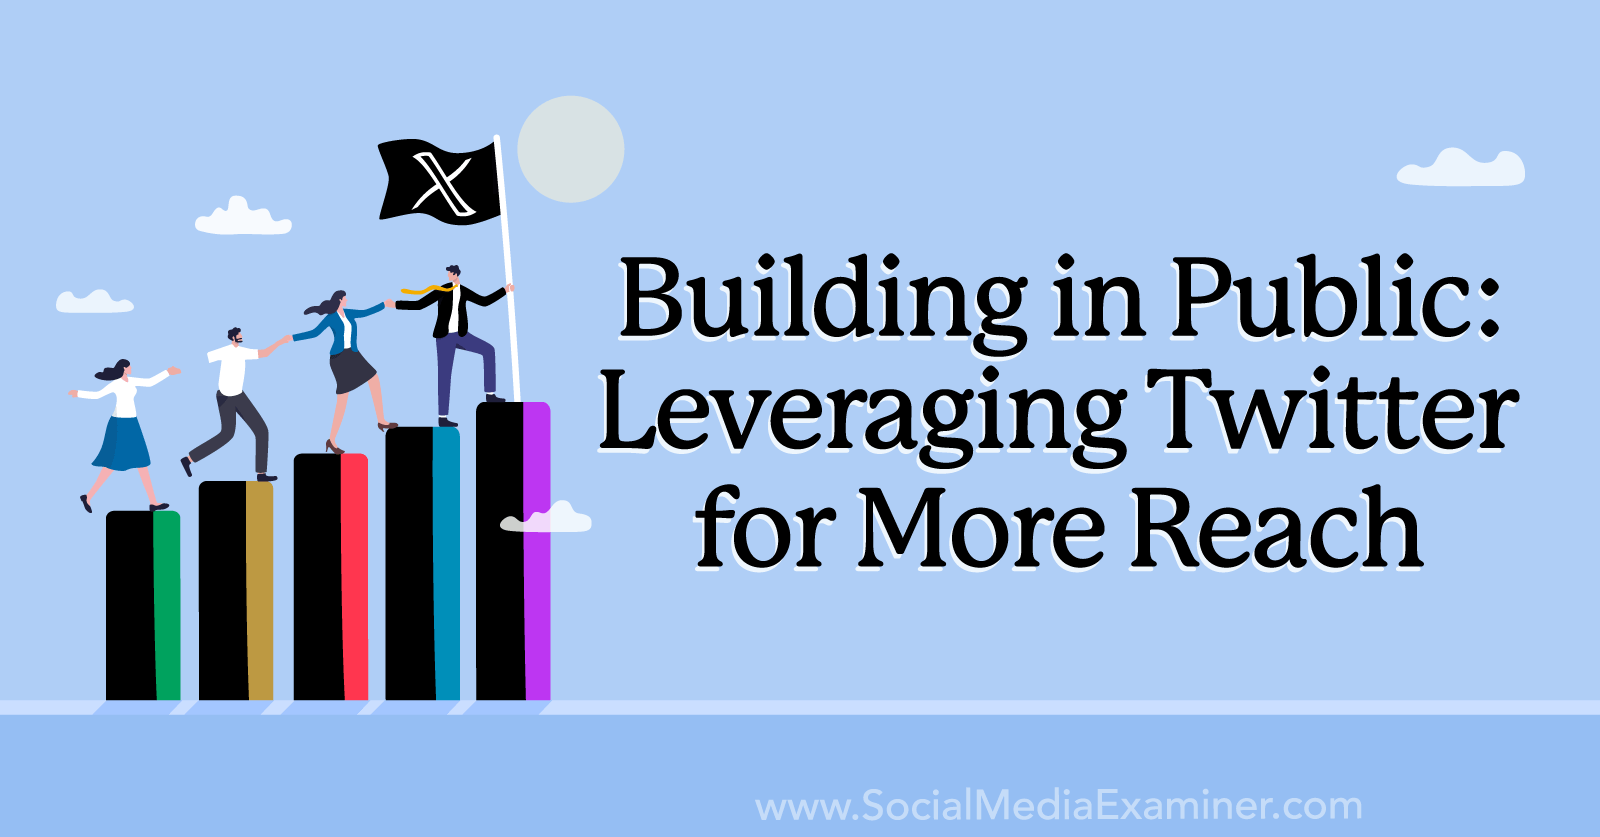 Building in Public: Leveraging Twitter for More Reach by Social Media Examiner